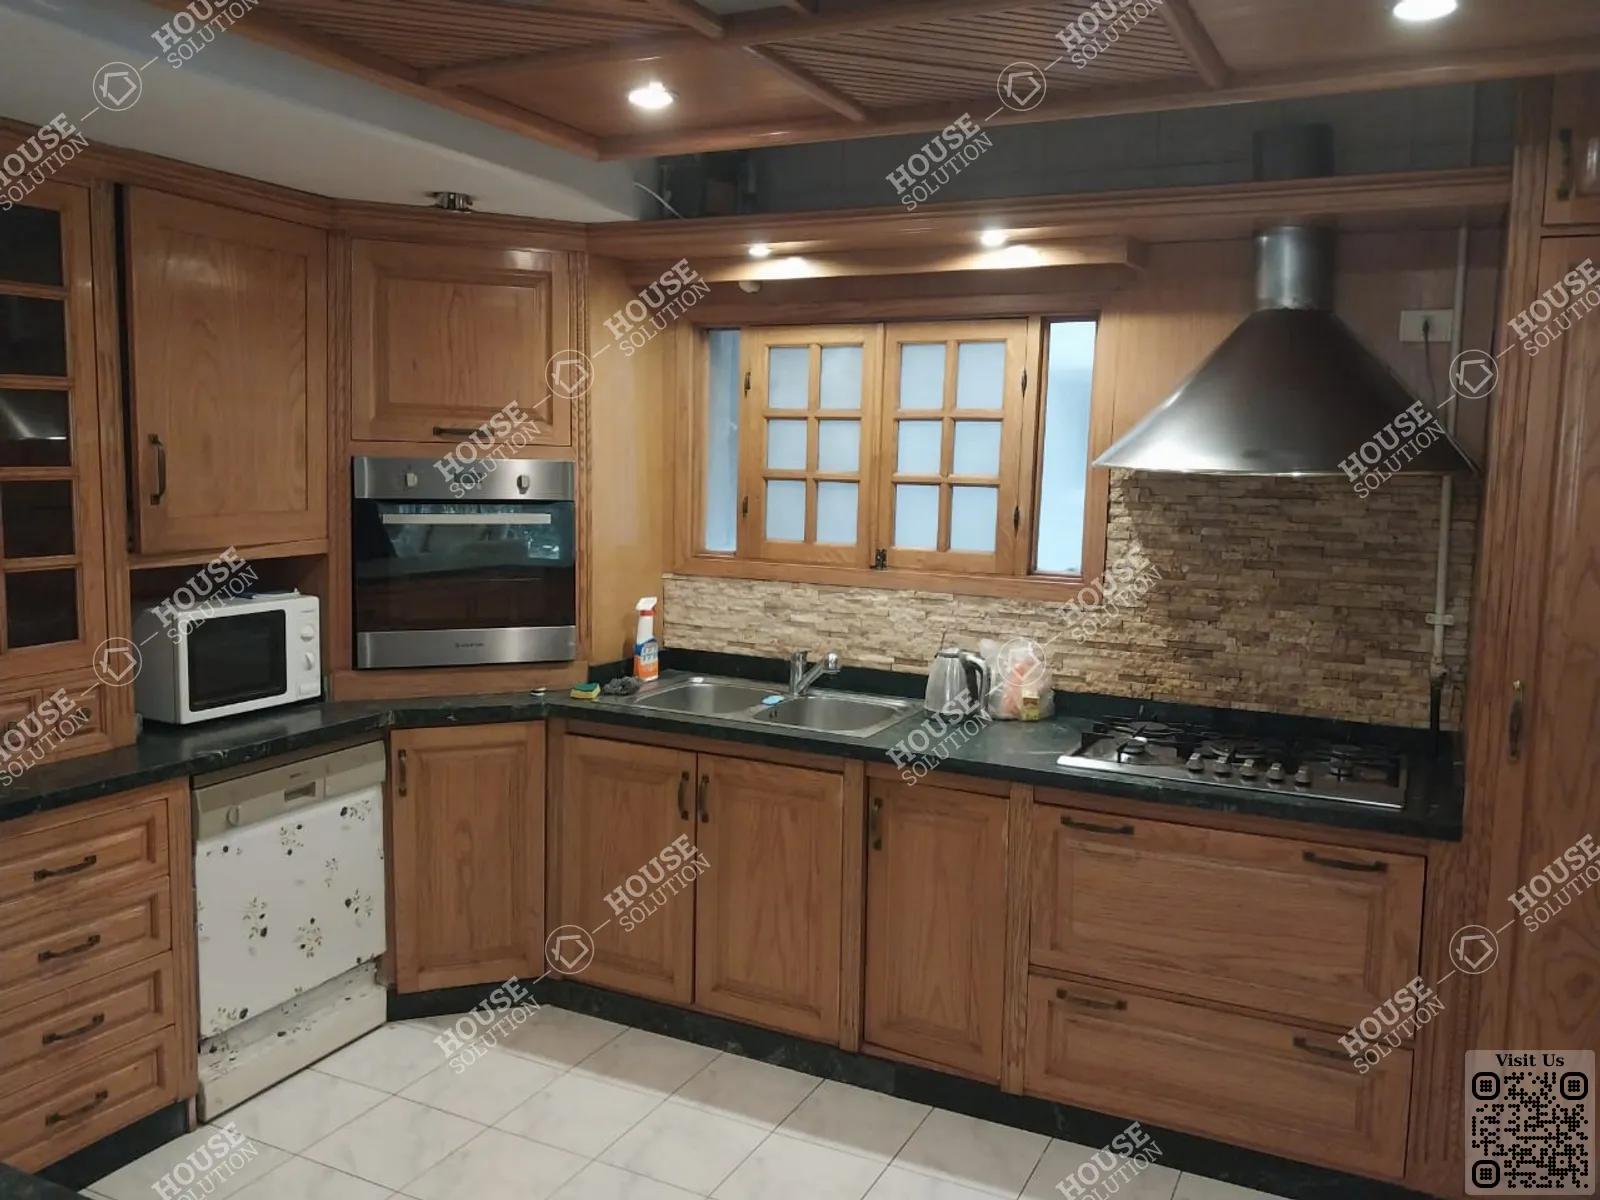 KITCHEN  @ Apartments For Rent In Maadi Maadi Sarayat Area: 200 m² consists of 3 Bedrooms 2 Bathrooms Furnished 5 stars #5334-0